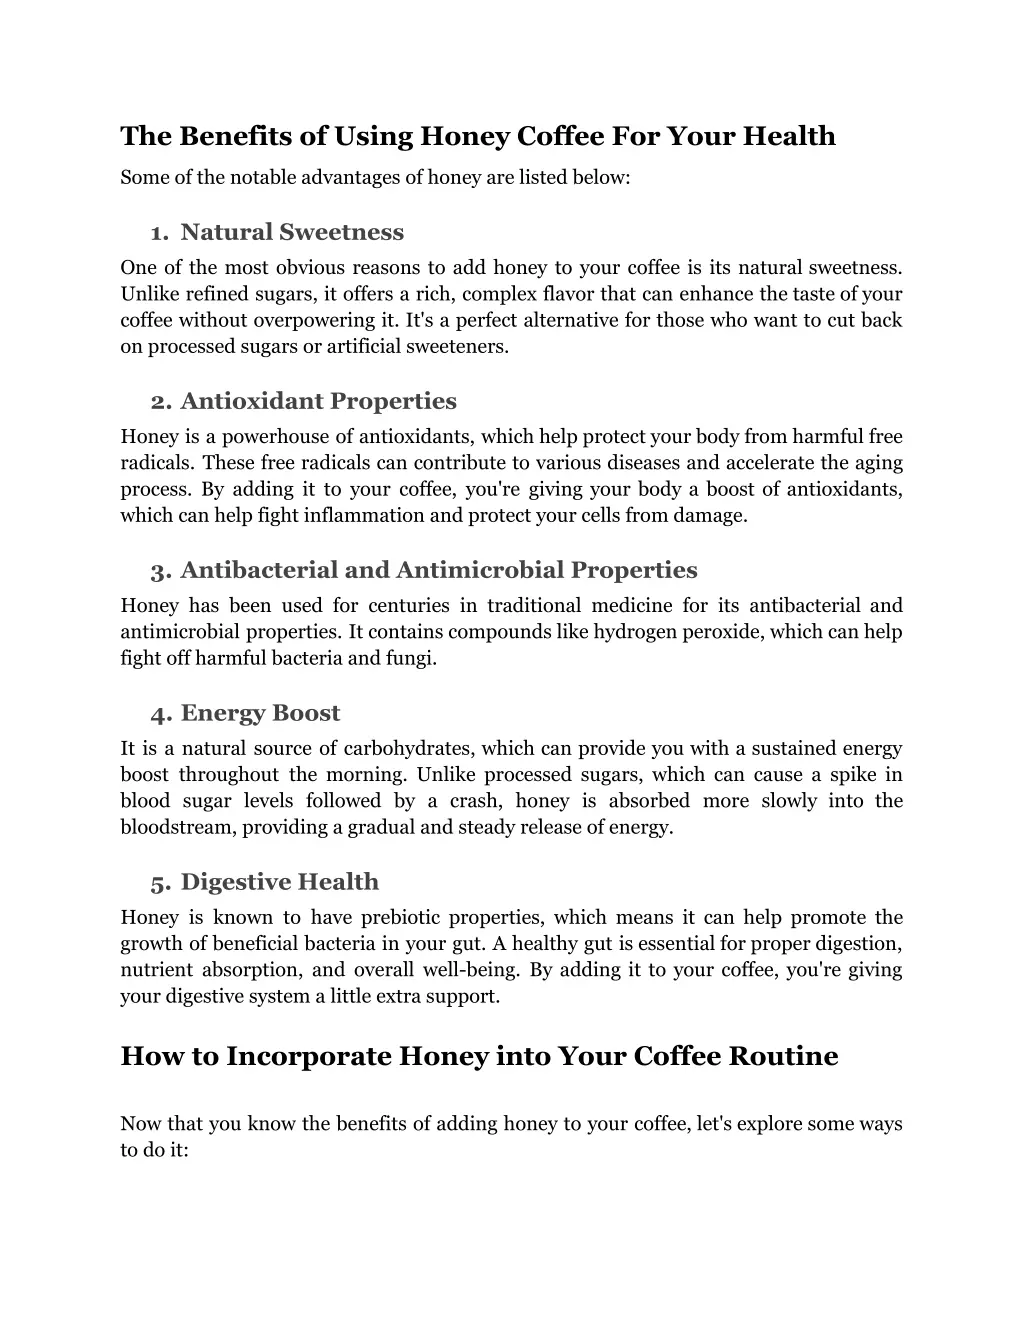 the benefits of using honey coffee for your health